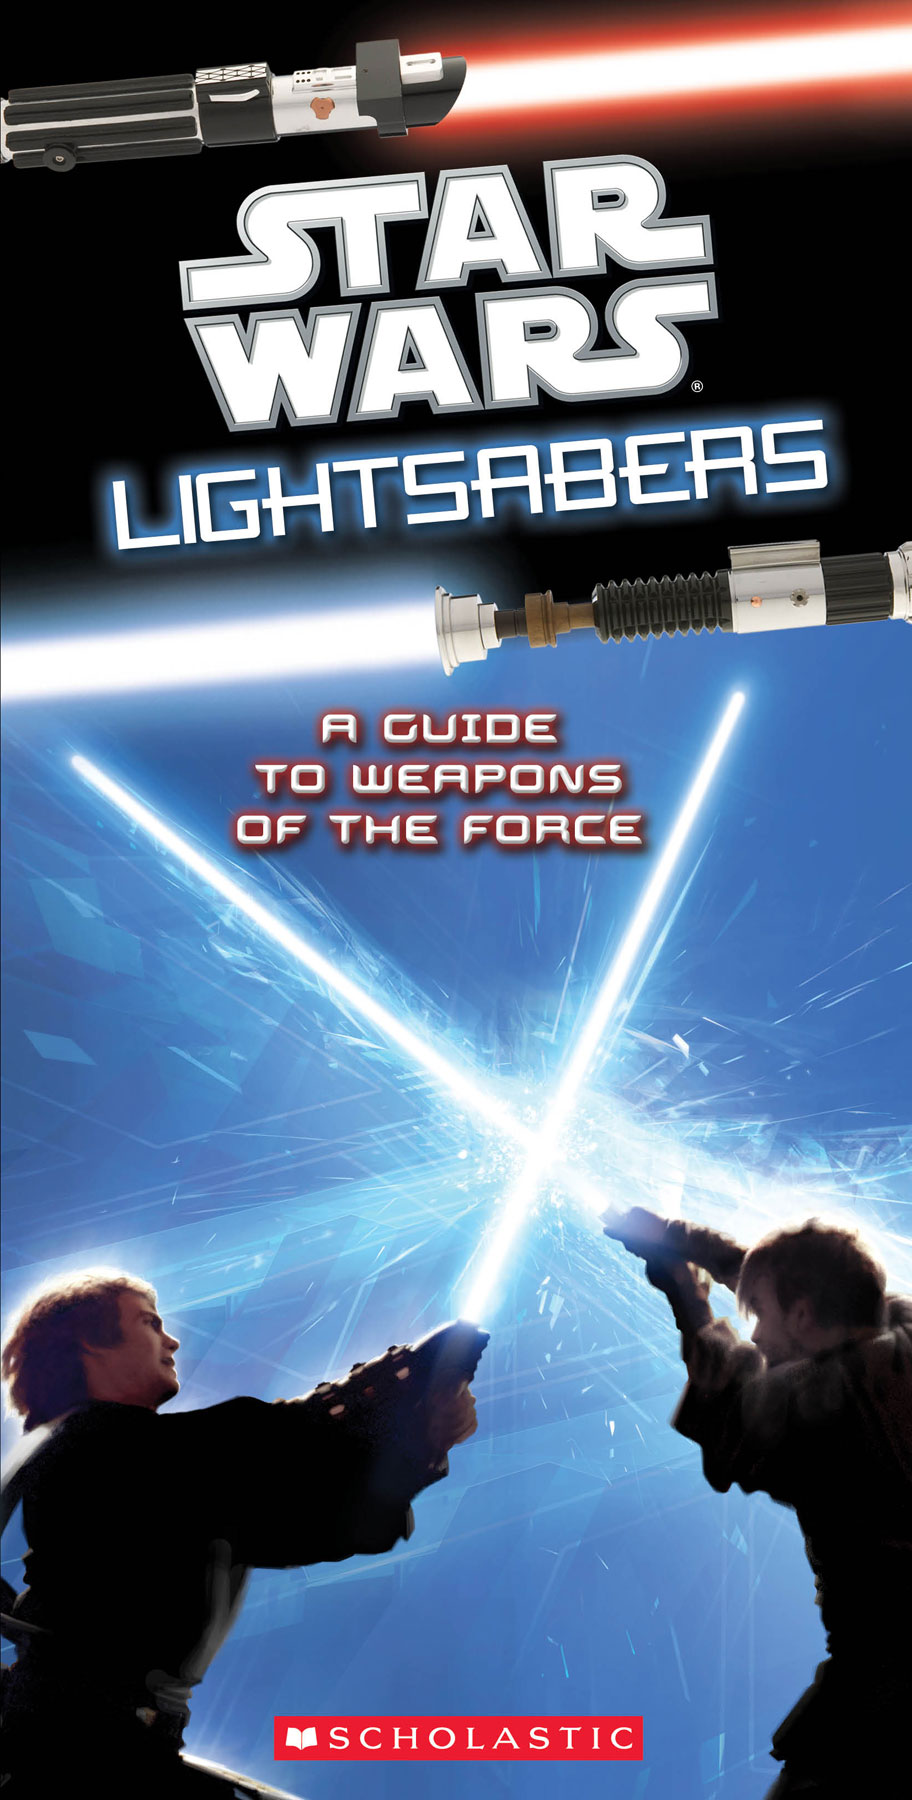 Lightsabers: A Guide to Weapons of the Force (01.12.2010)